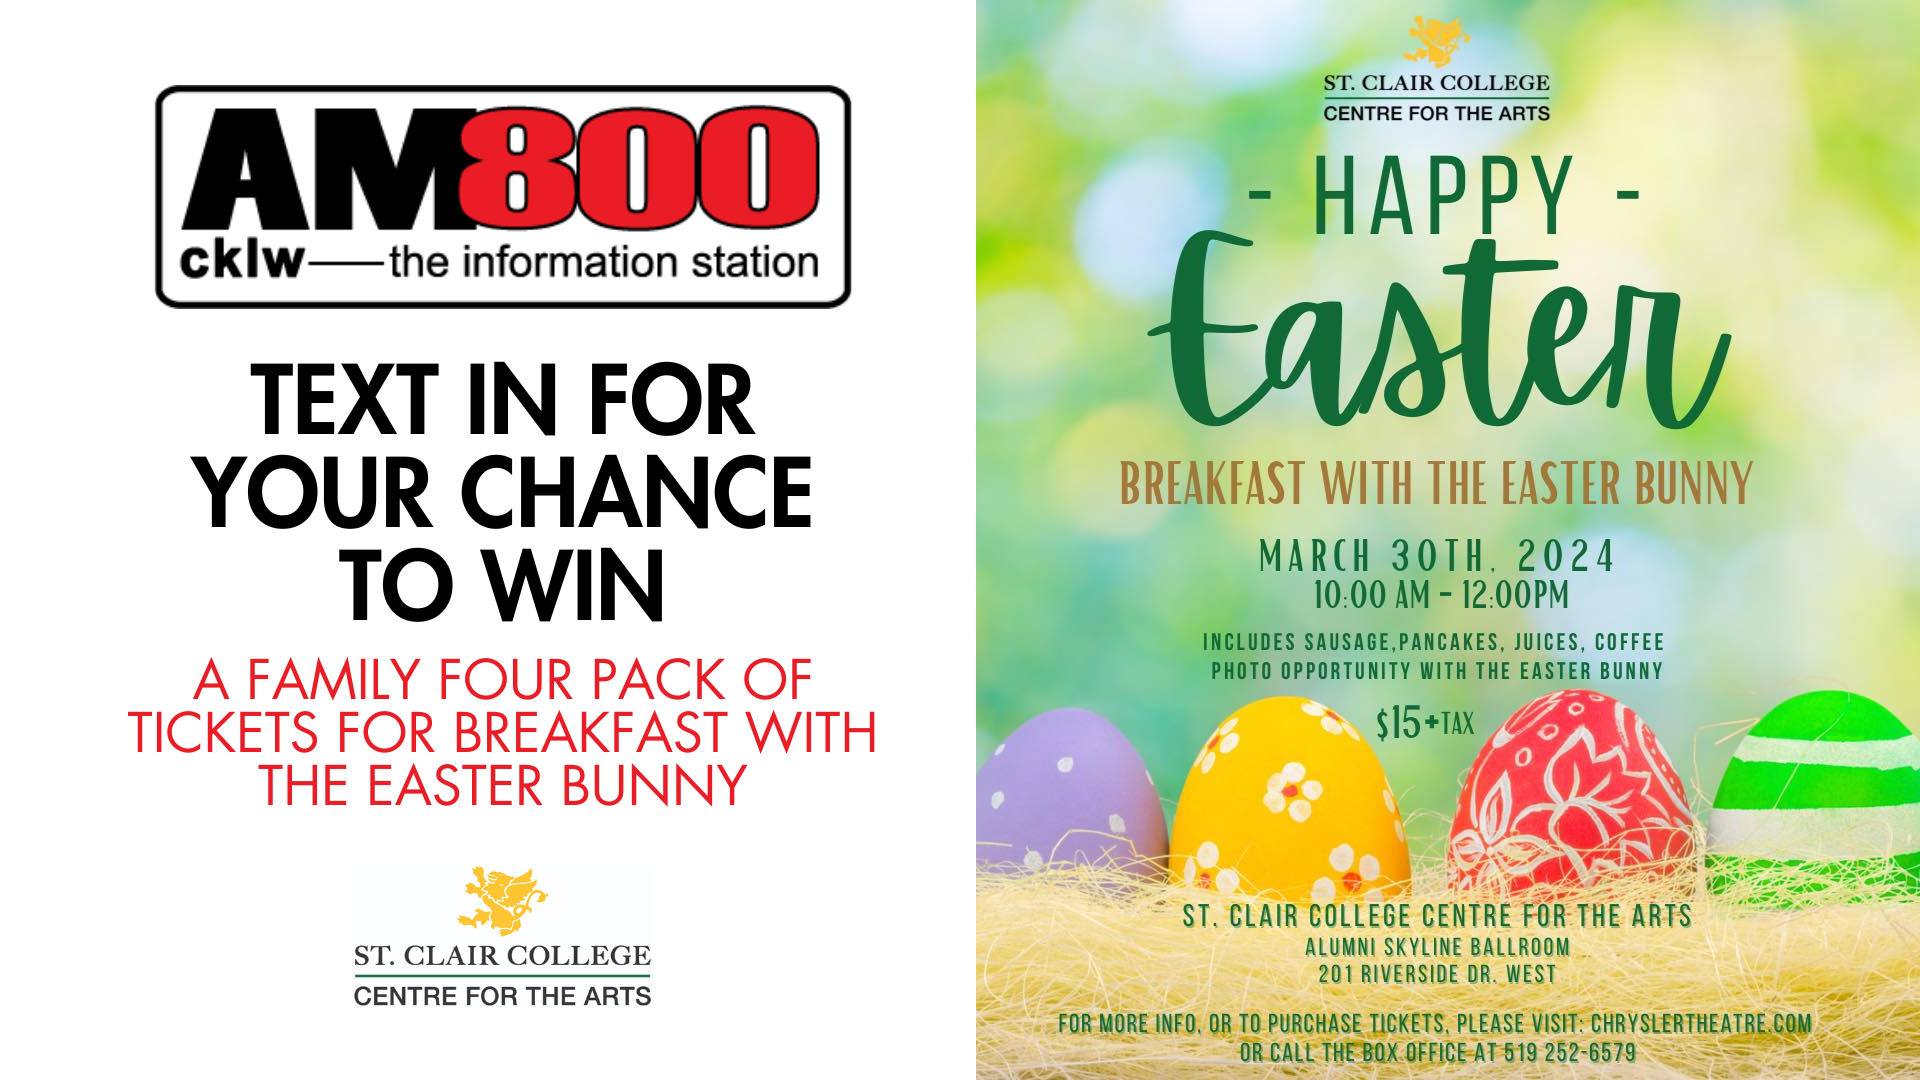 http://www.am800cklw.com/content/dam/audio/uploadImg/contests/2024/03/08/breakfast-with-the-easter-bunny-text-to-win.png